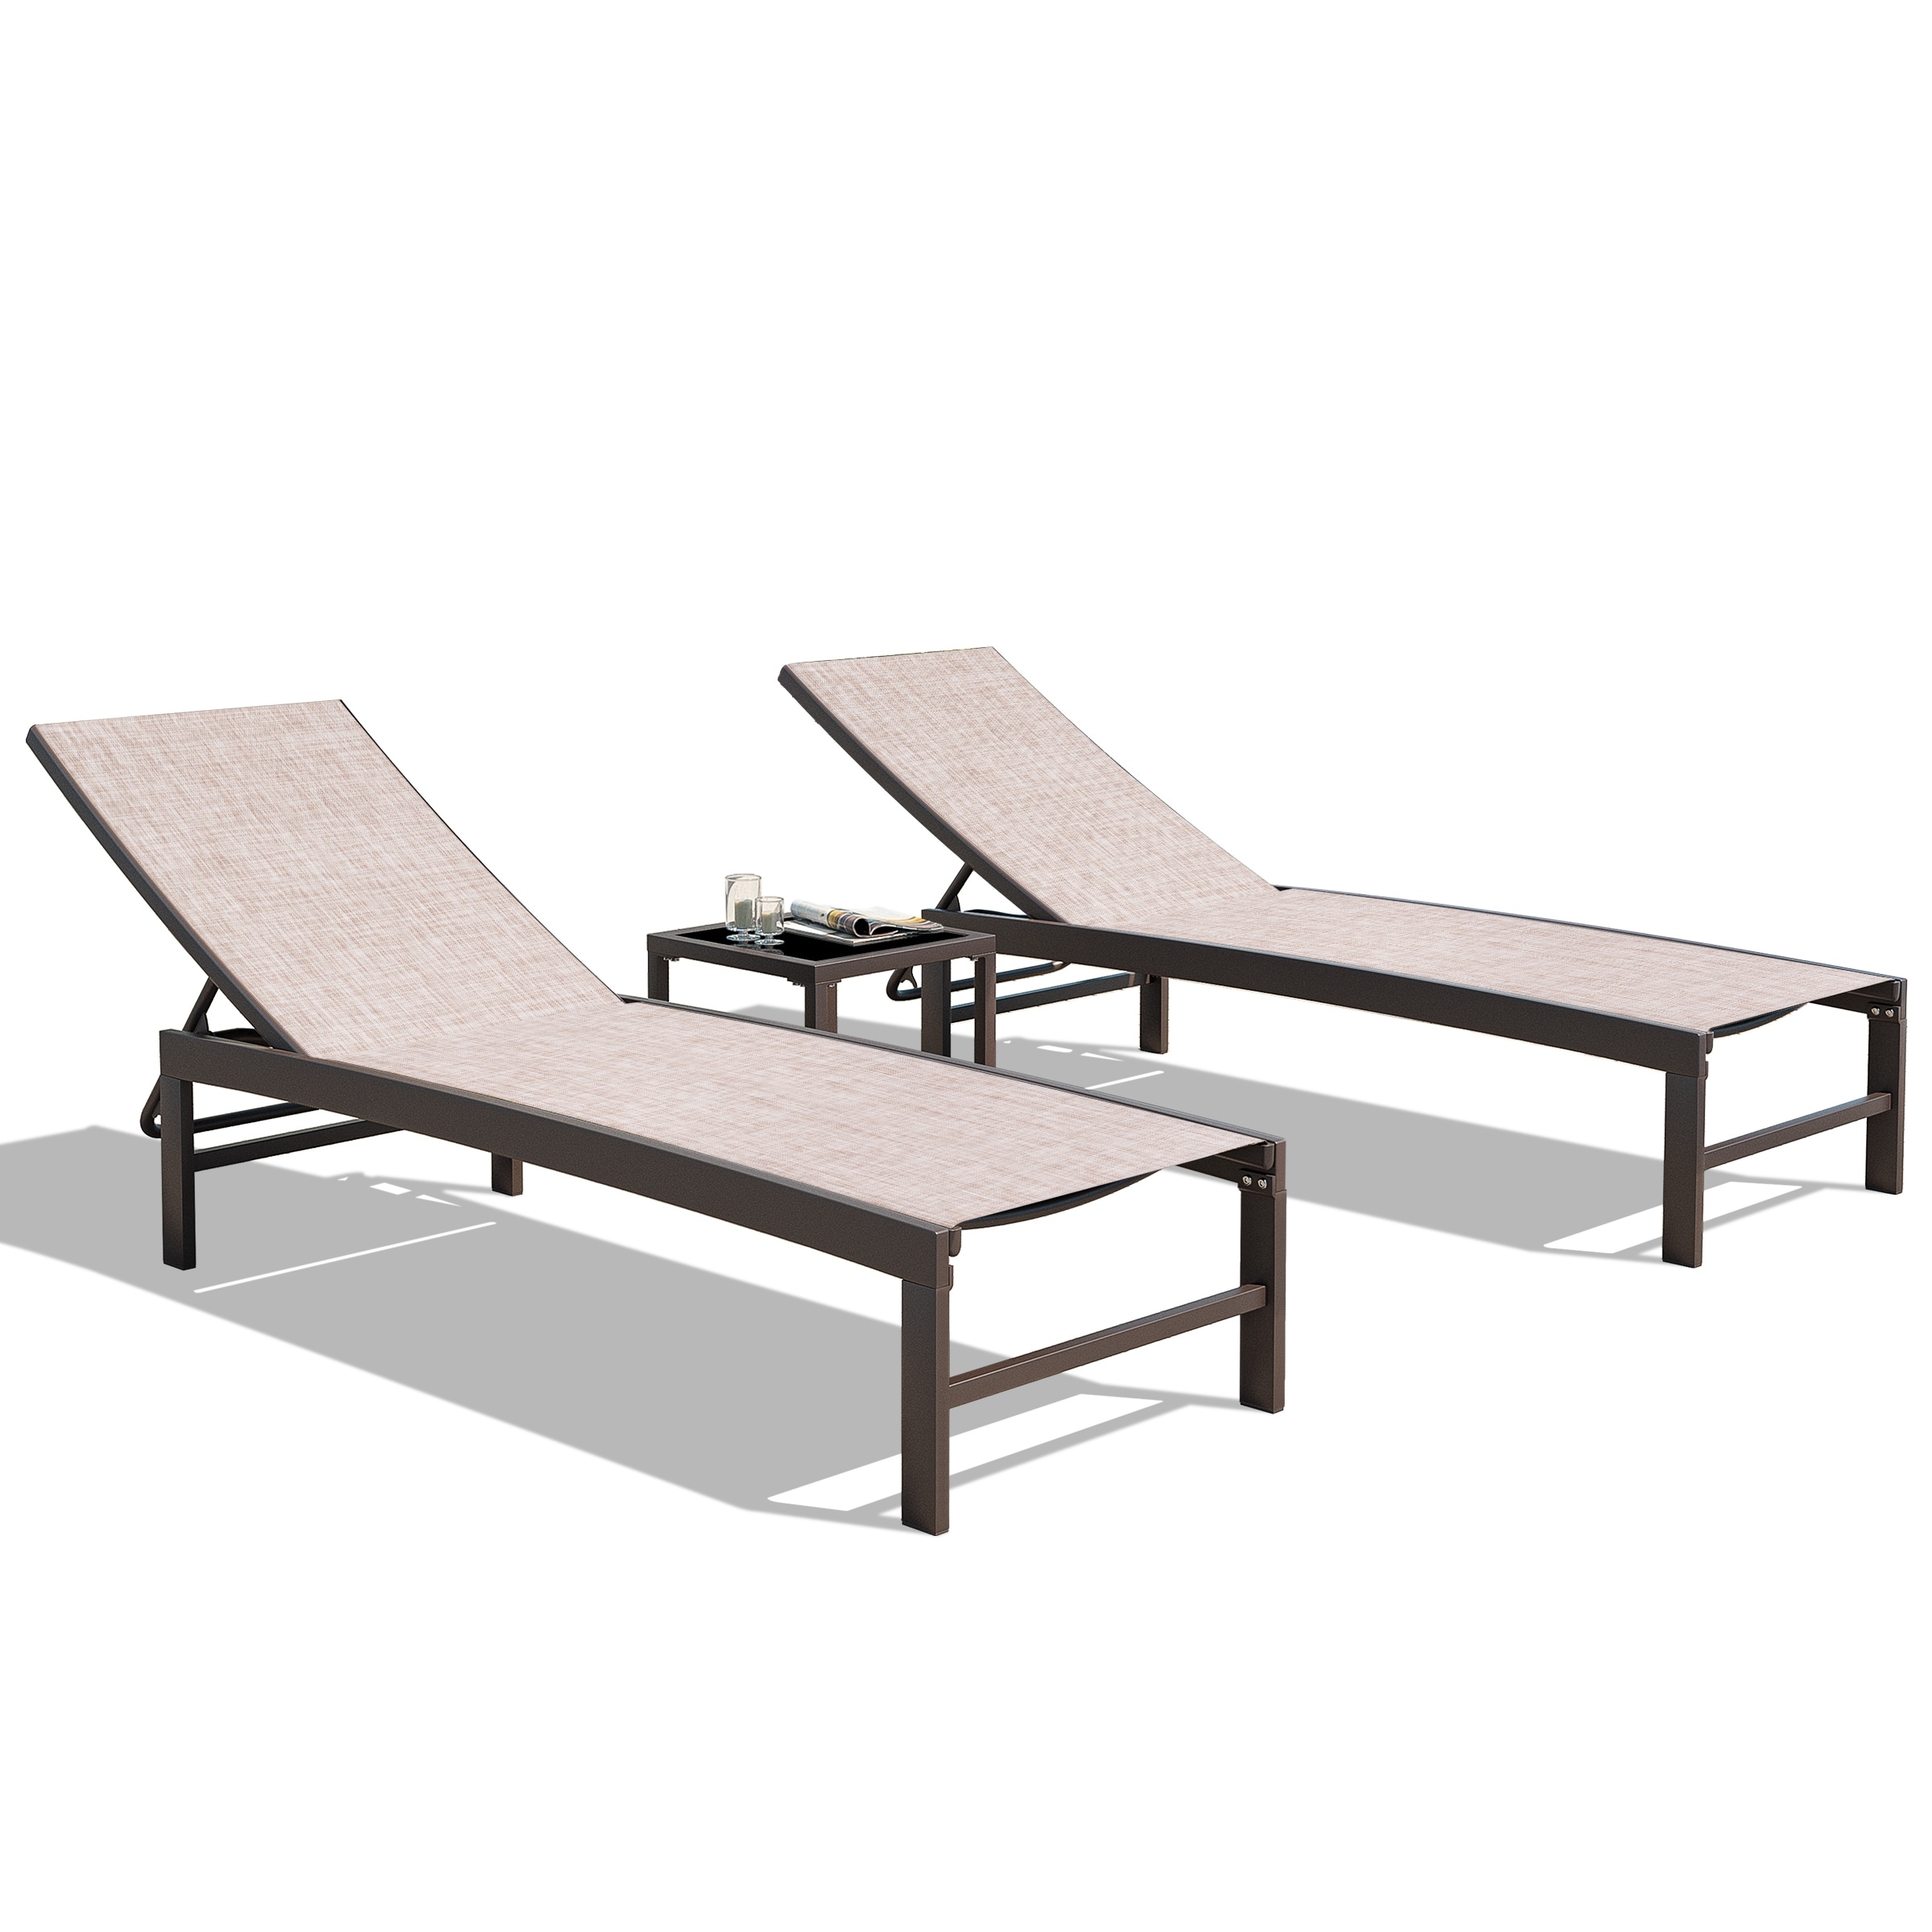 Outdoor Indoor Adjustable Lounge Chair And Table Set - 71.65 L X 21.85 W X 13.78 H